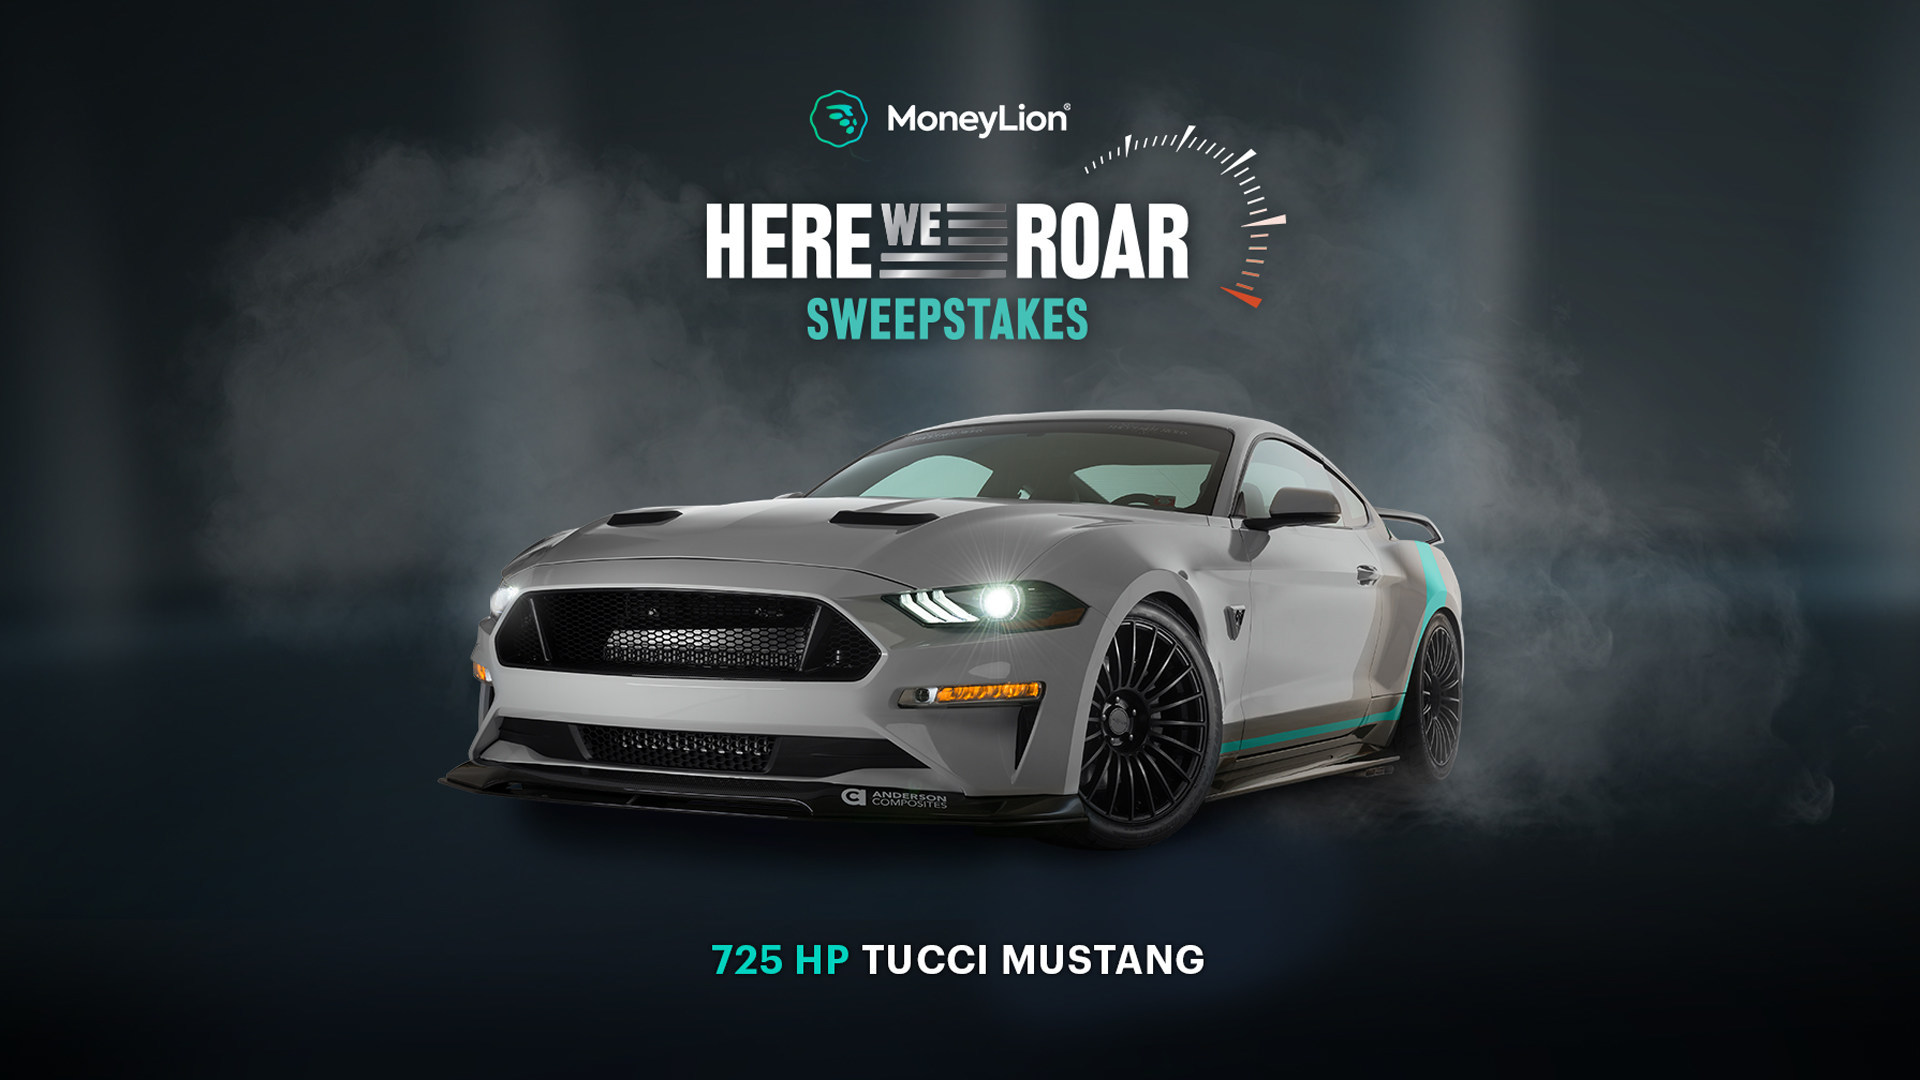 MoneyLion and Ford Performance Unveil Another New 2019 Ford Mustang GT Built by Team Penske Driver Austin Cindric and Hot Rod Aficionados Dave and Dom Tucci for the “HERE WE ROAR” Sweepstakes